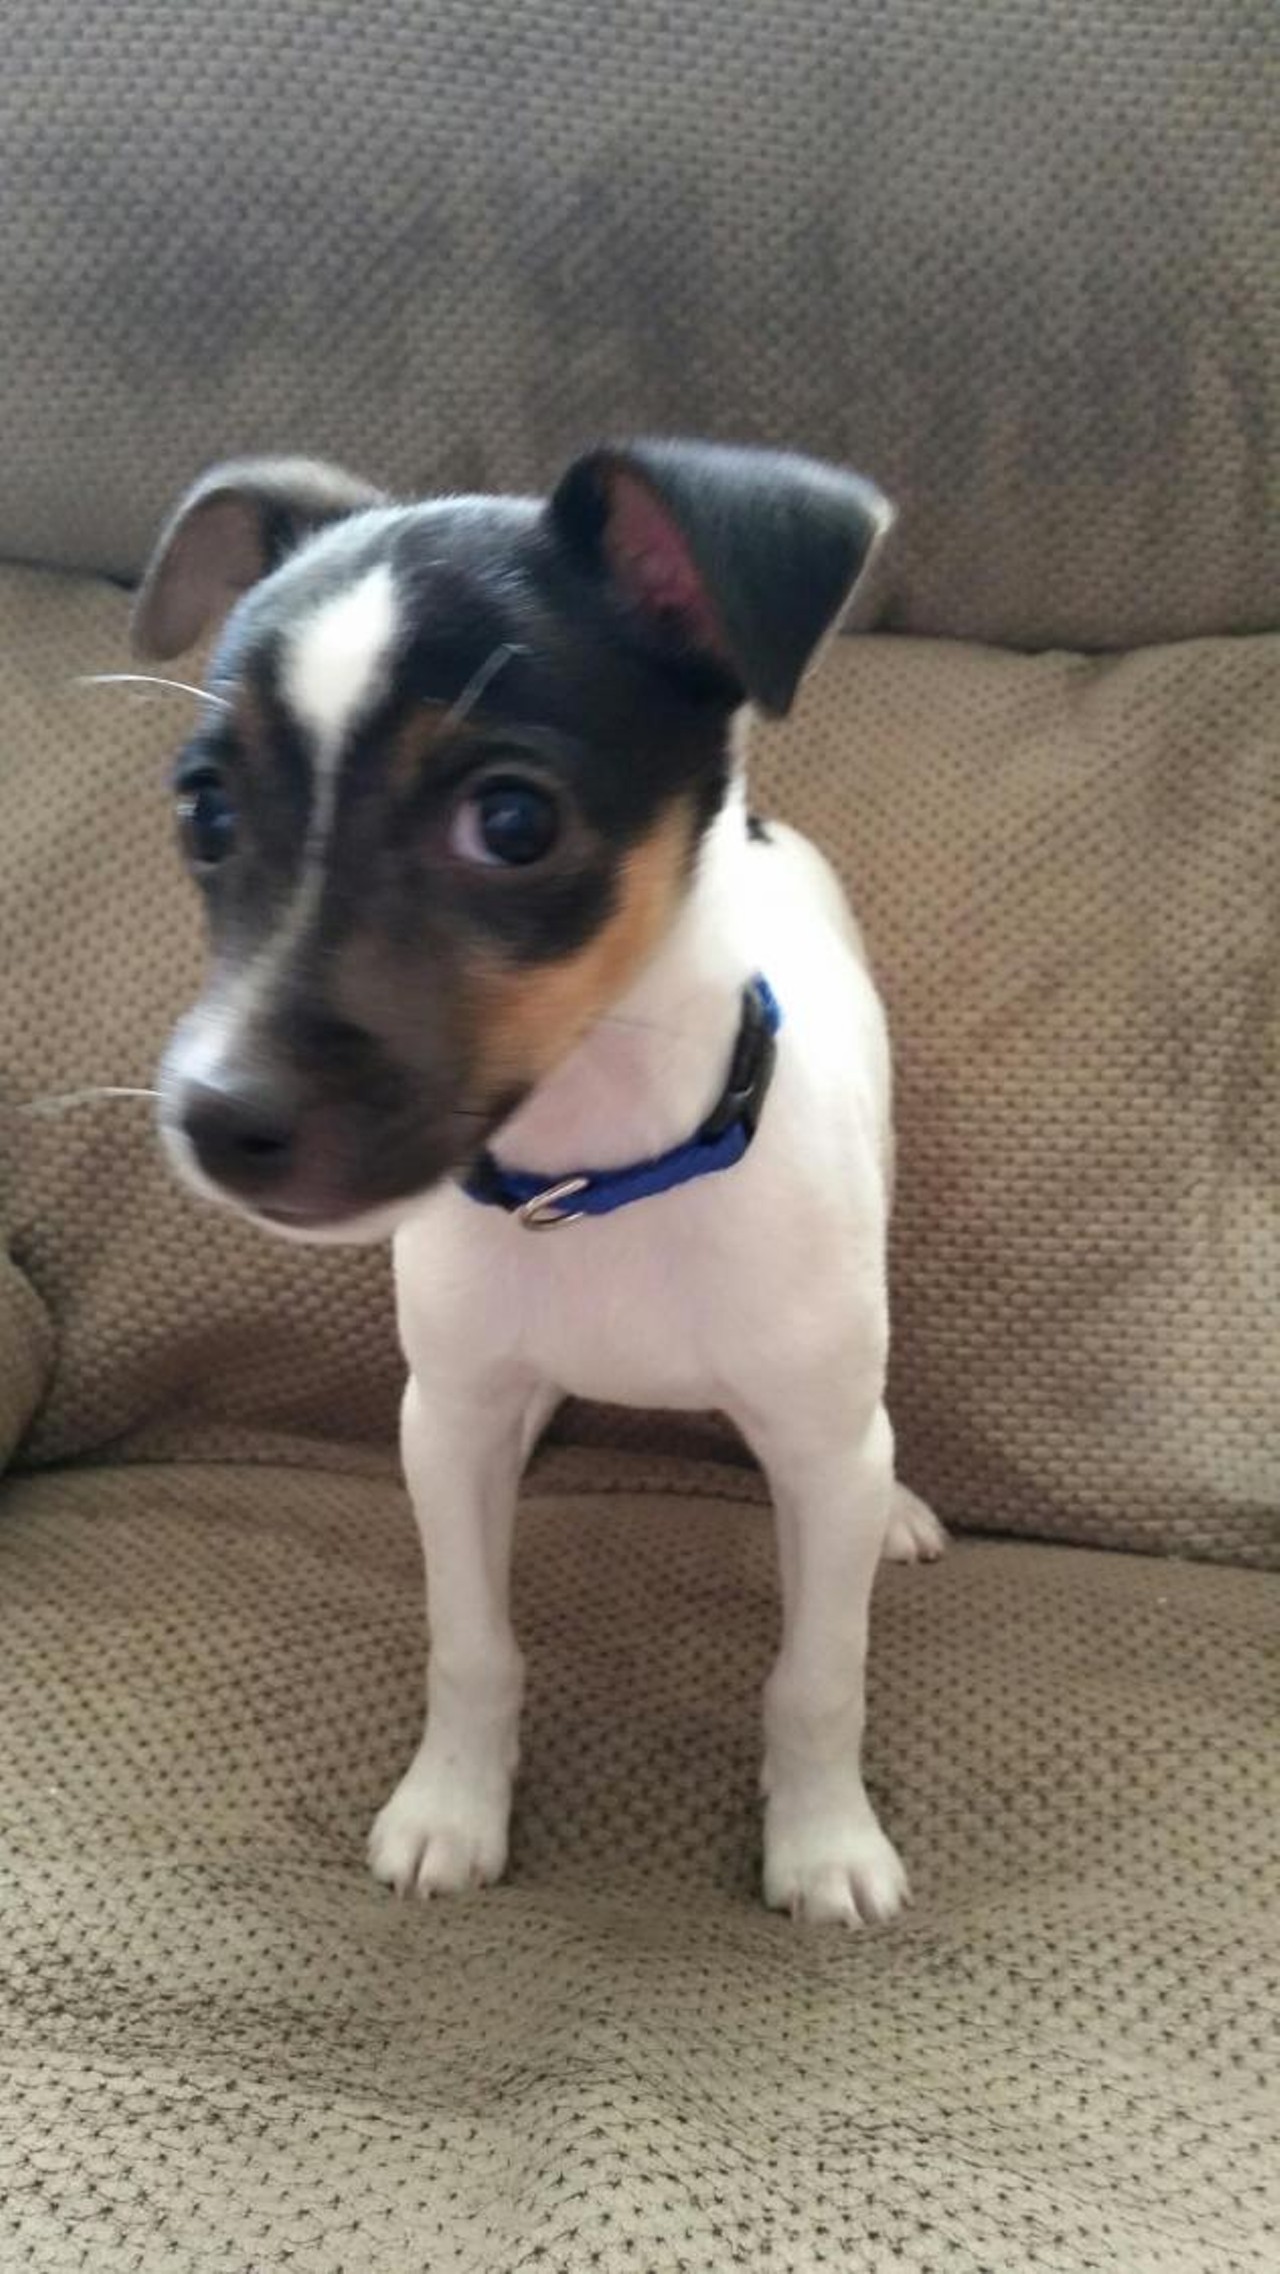  Spaz
Rat Terrier Mix | Male | Puppy
Spaz looks like a spaz. There, we said it.